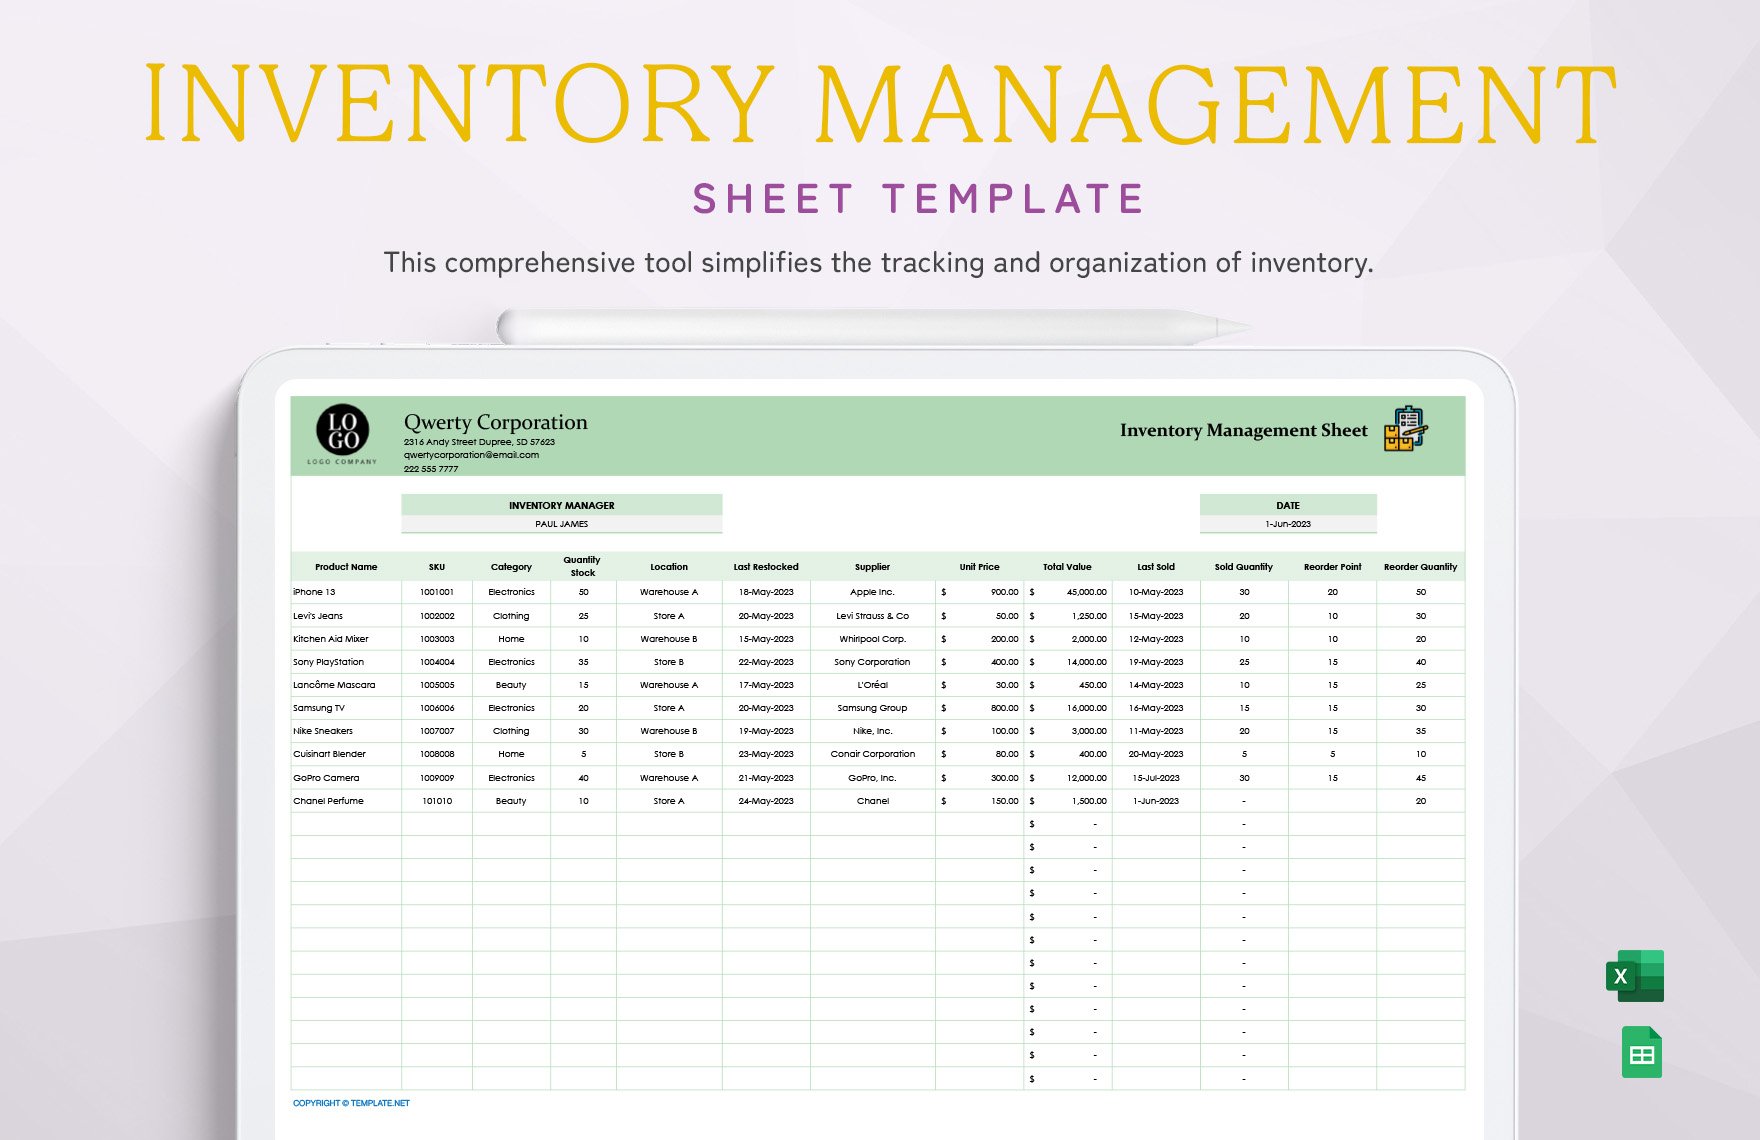 Inventory Management Sheet Template in Excel, Google Sheets